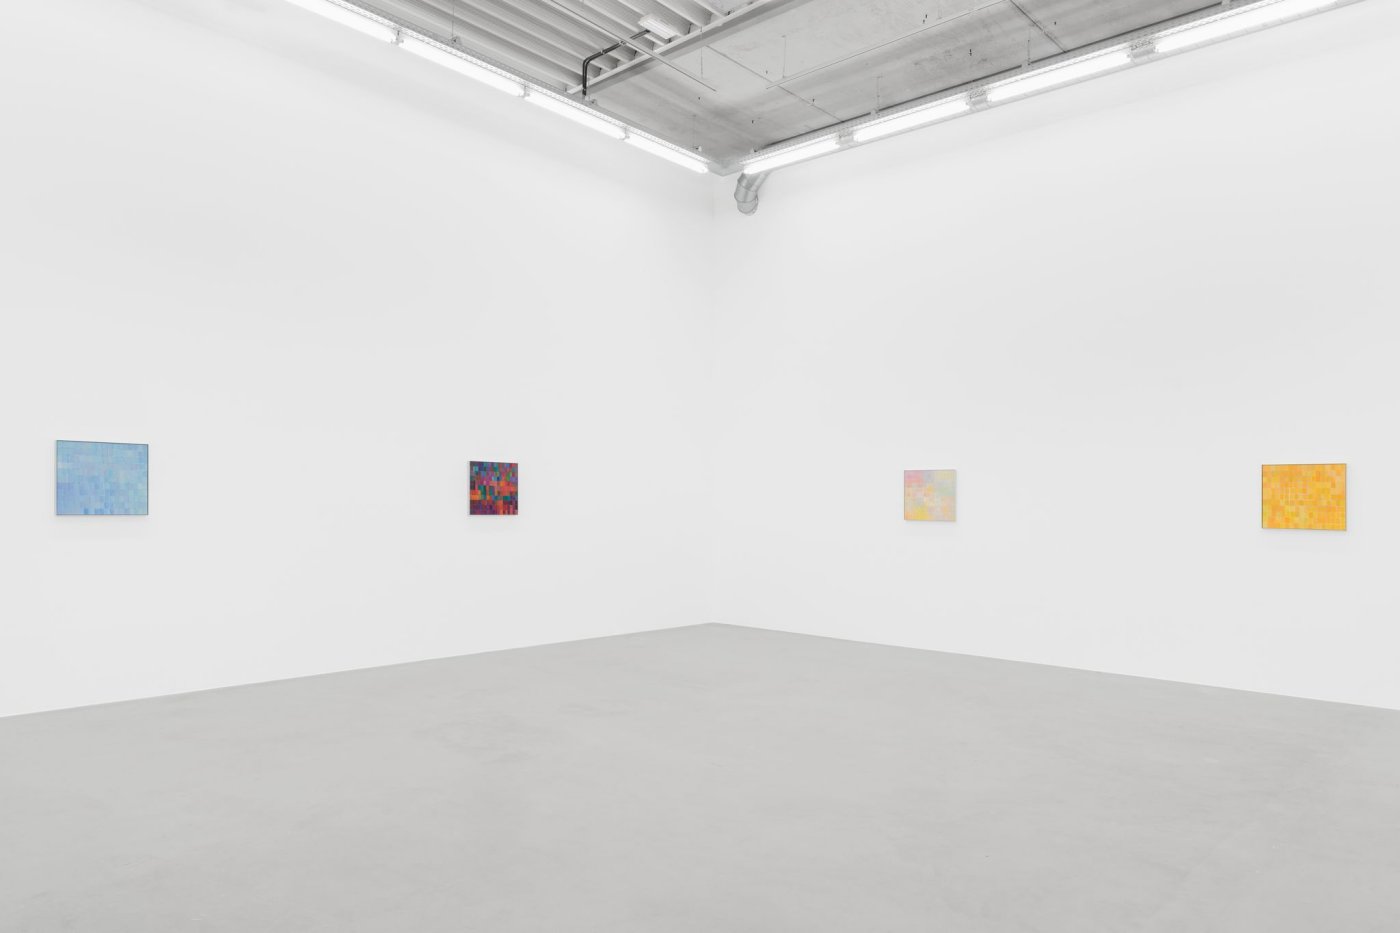 Installation image for Jean-Baptiste Bernadet: Time and Again, at Almine Rech